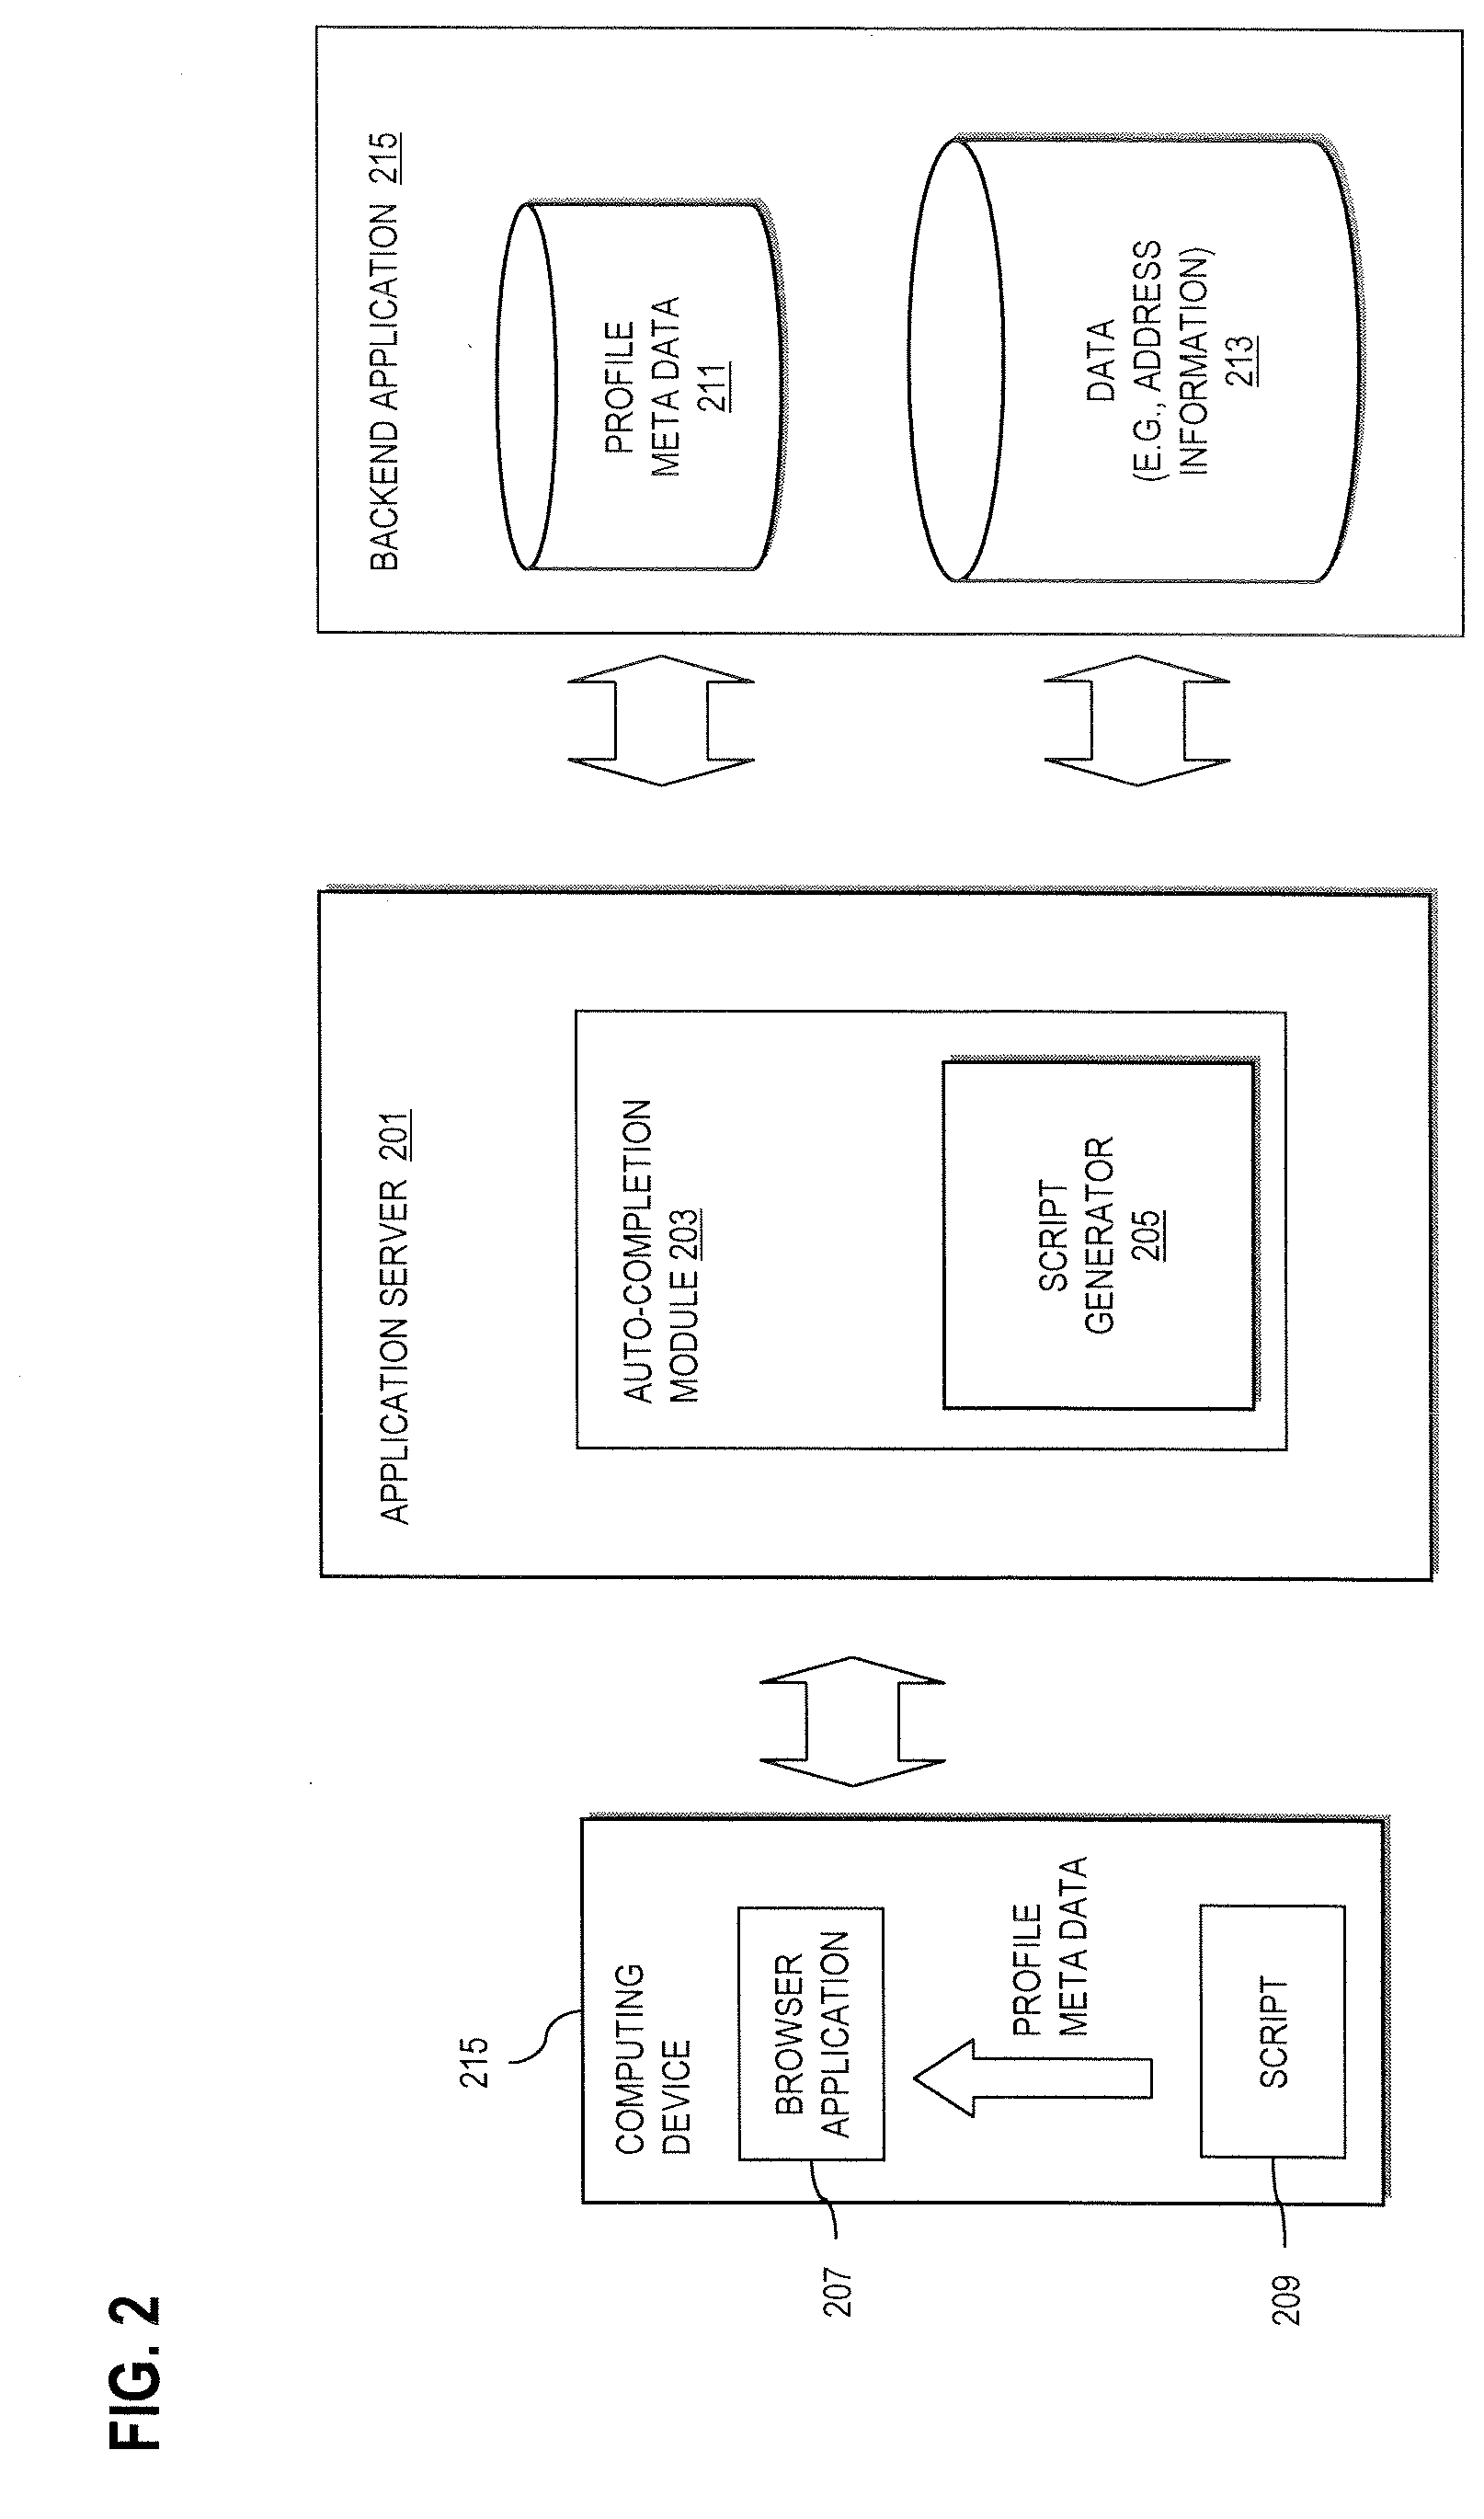 Method and apparatus for providing auto-completion of information